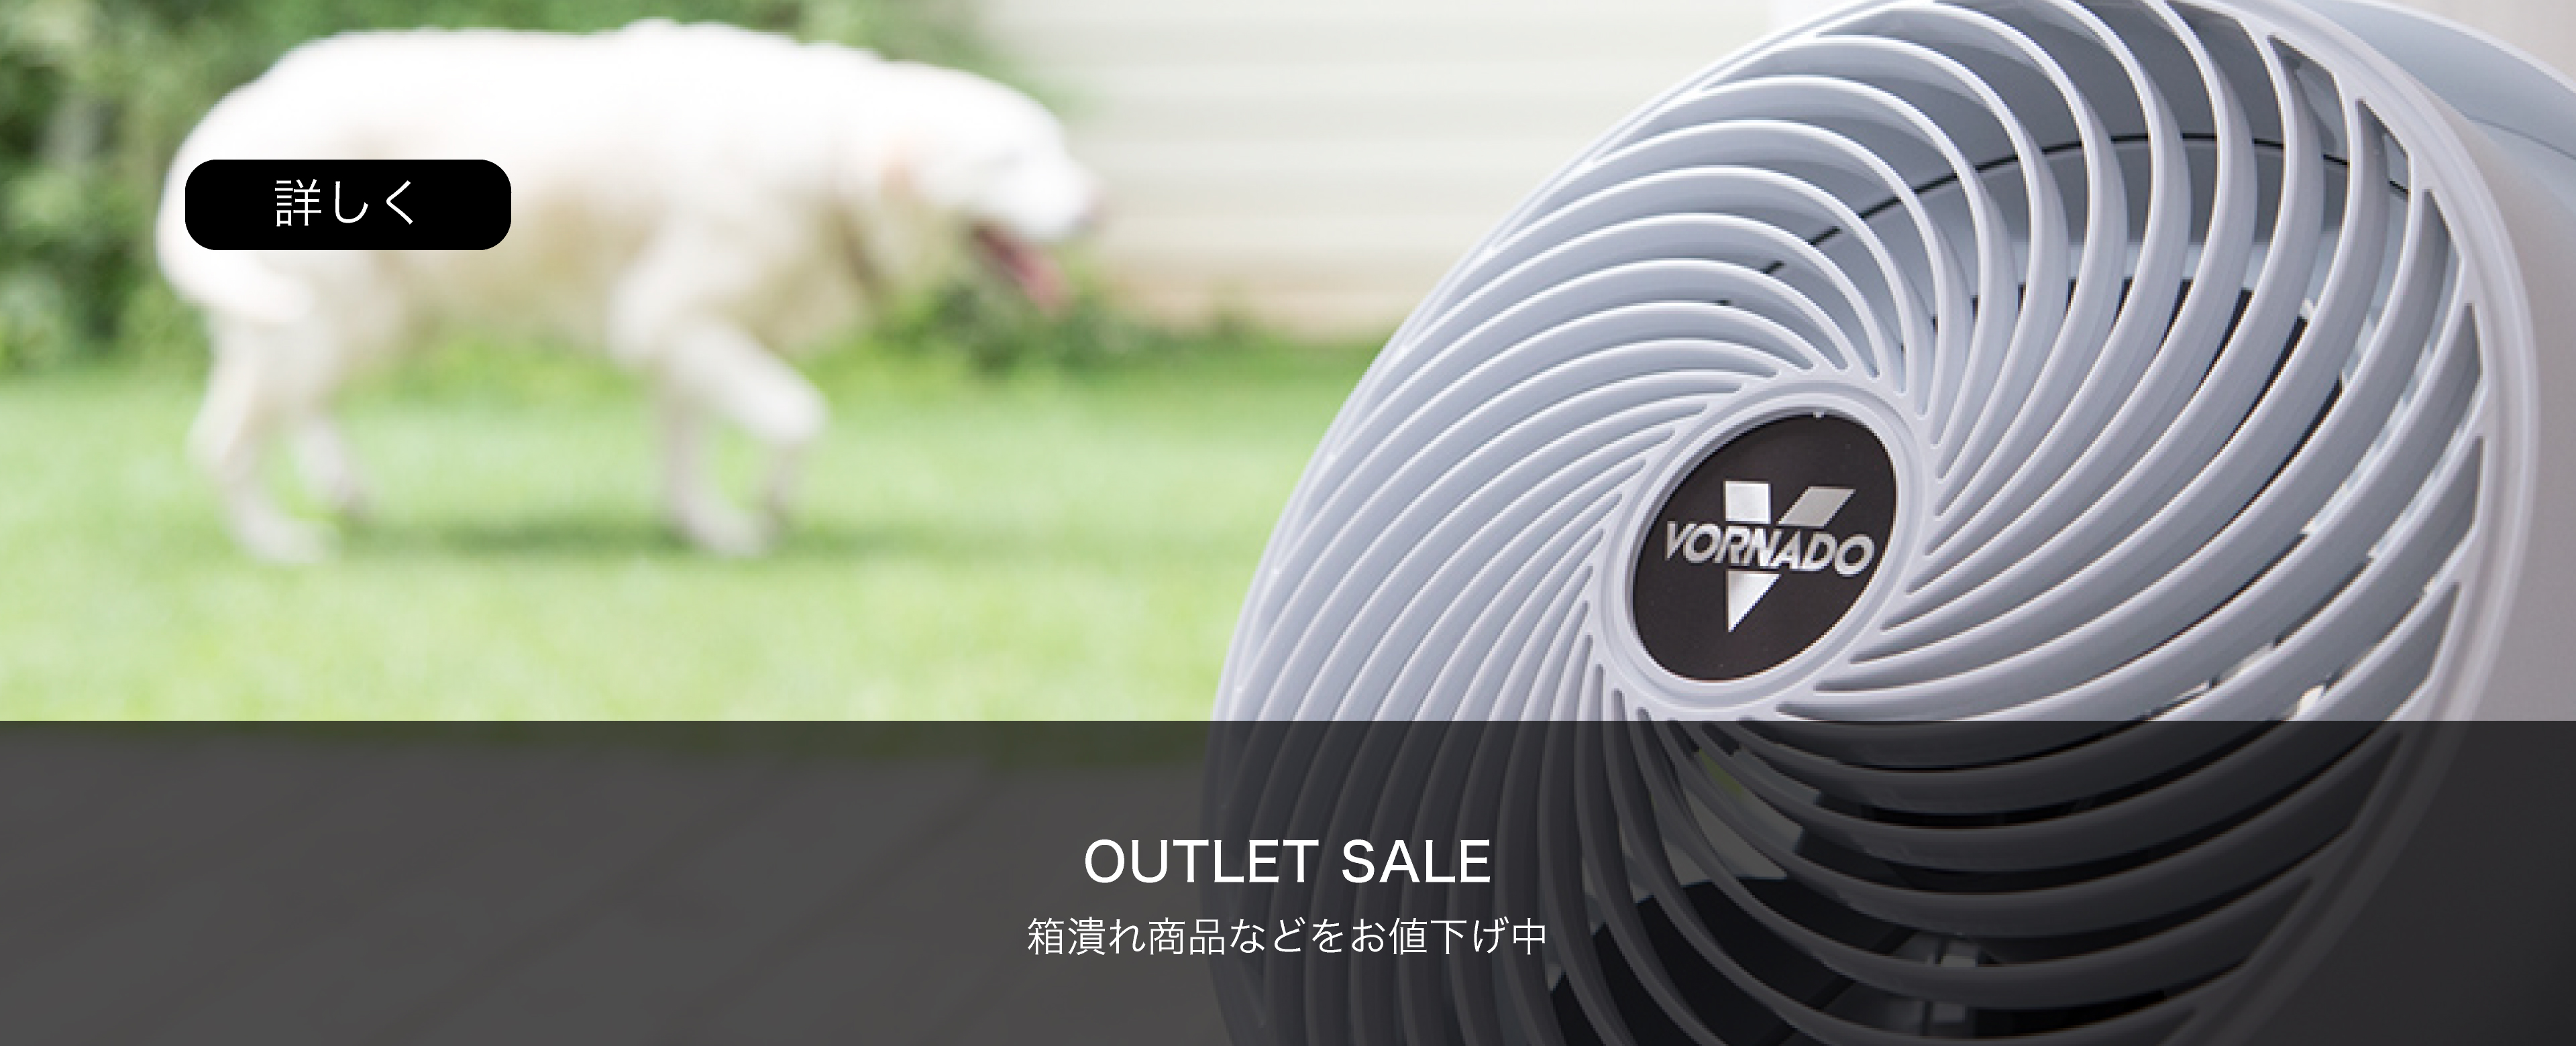 OUTLET SALE 箱つぶれ商品などをお値下げ中